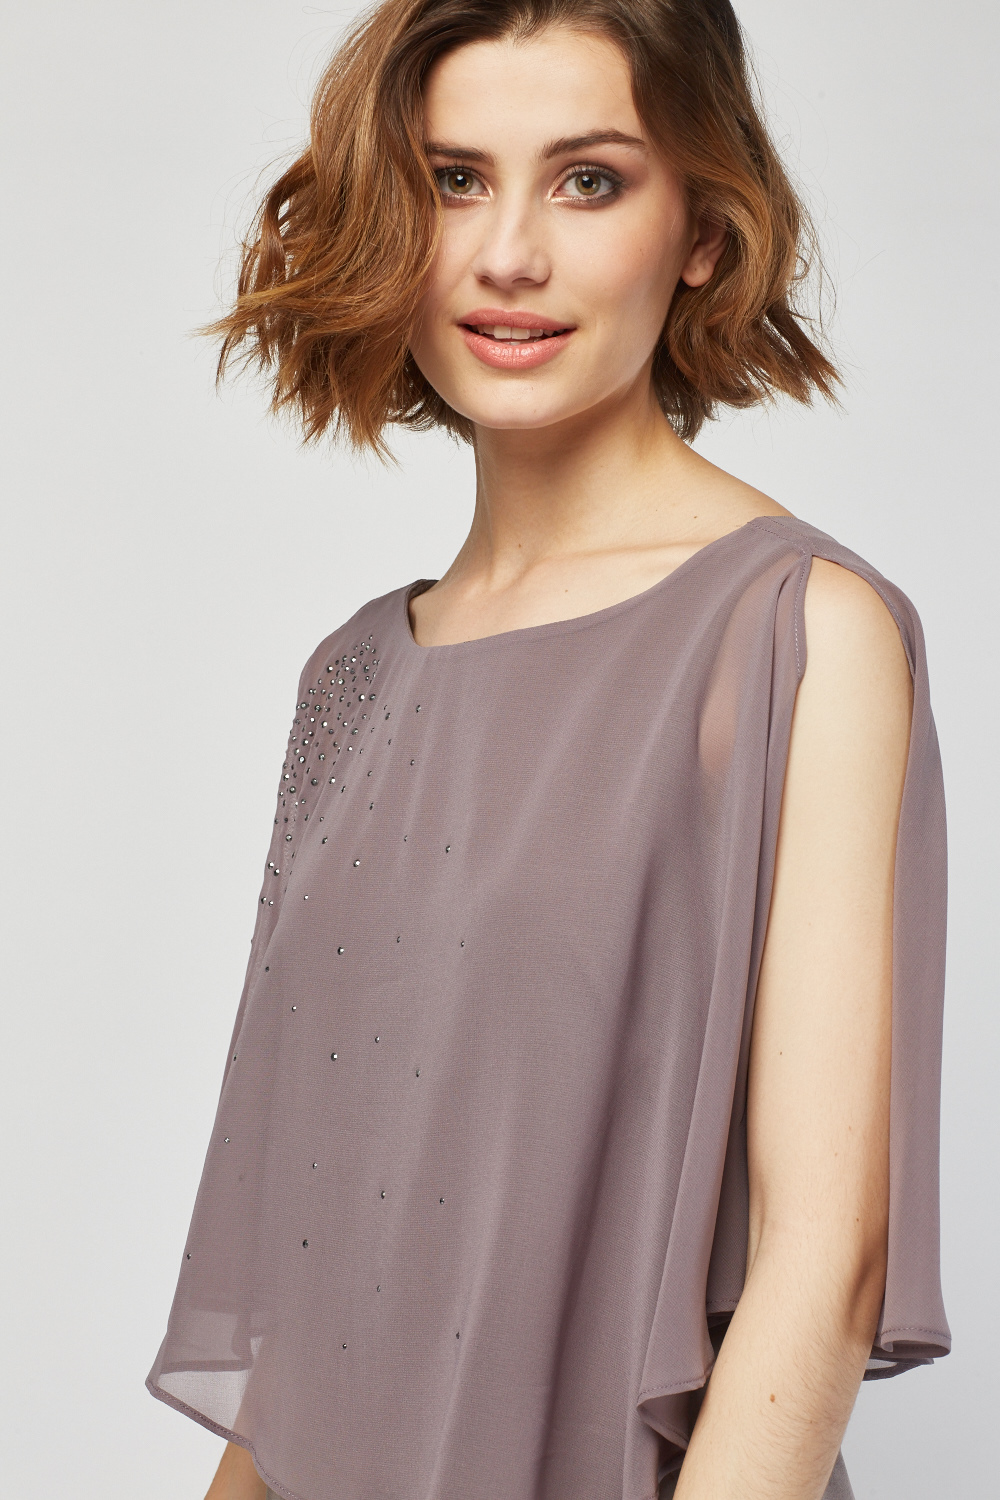 Encrusted Chiffon Overlay Blouse - Just $7